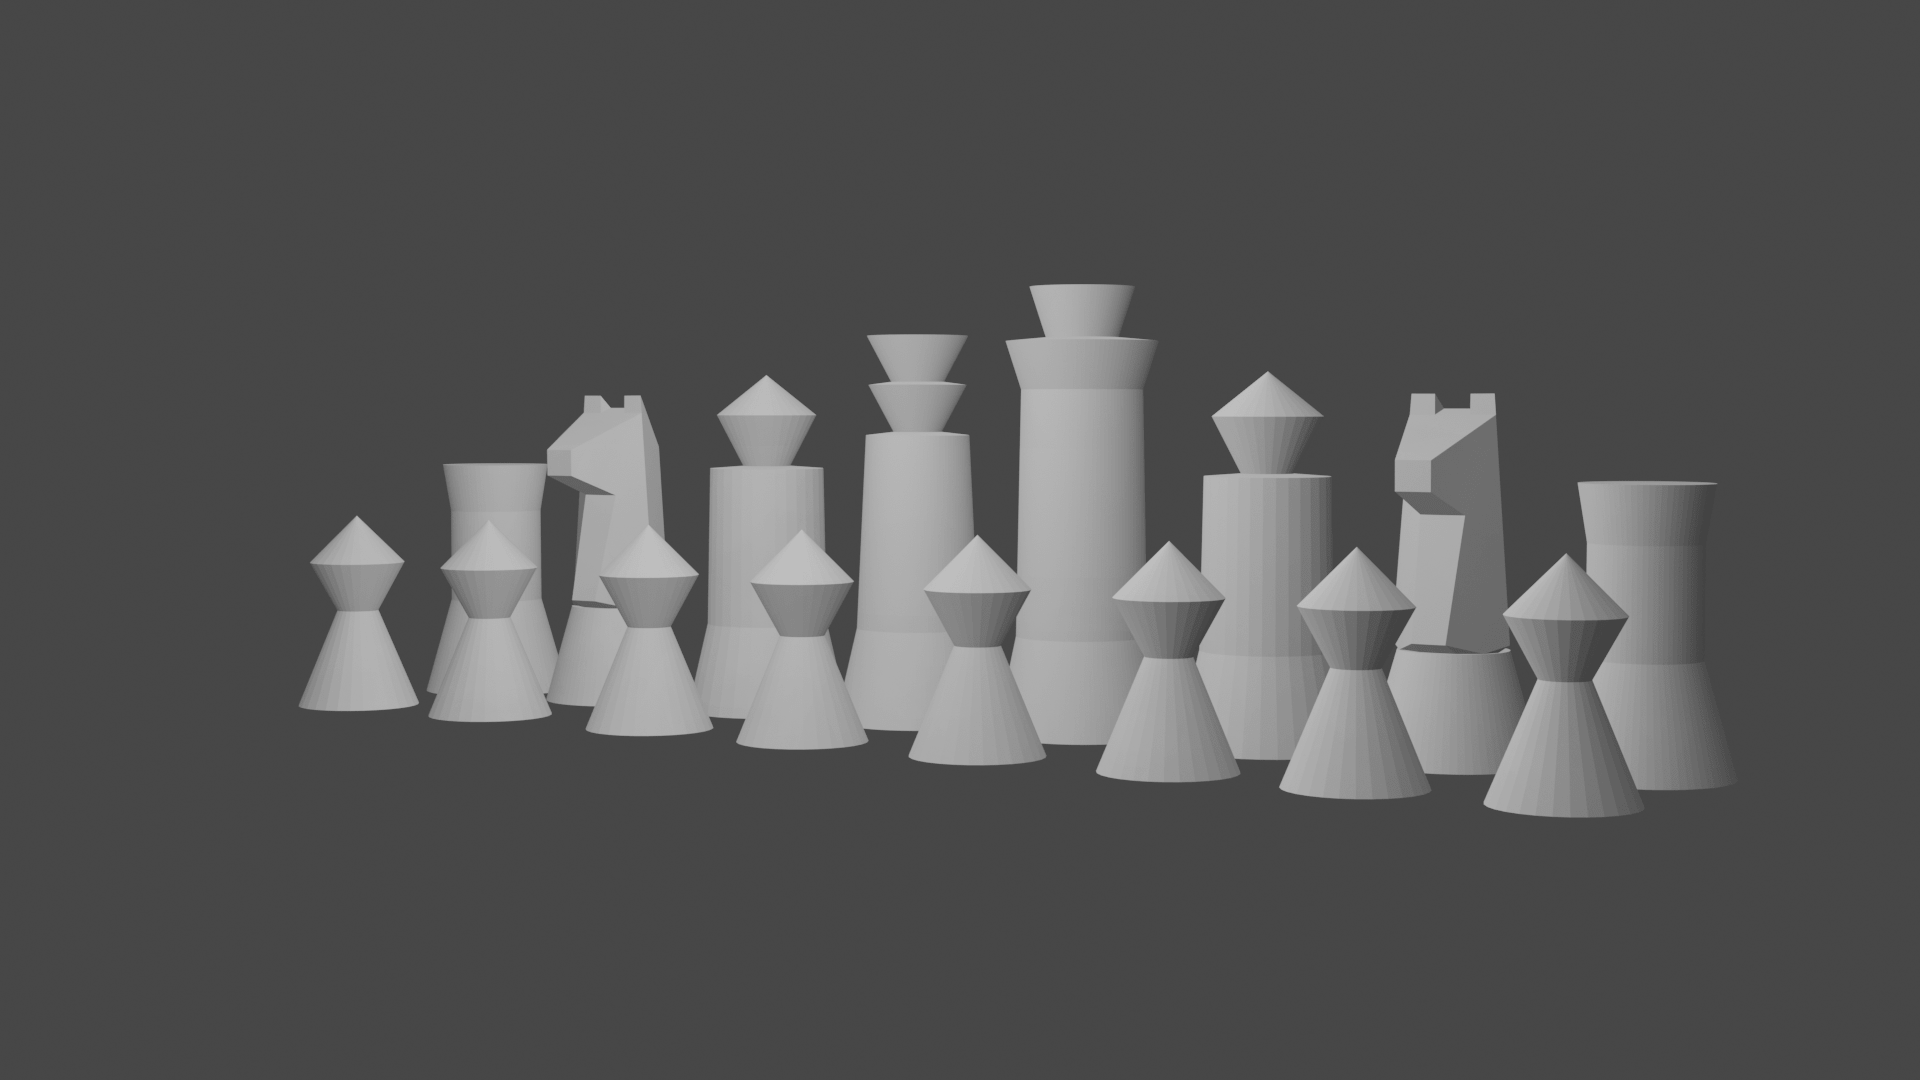 Rendered image of the chess set